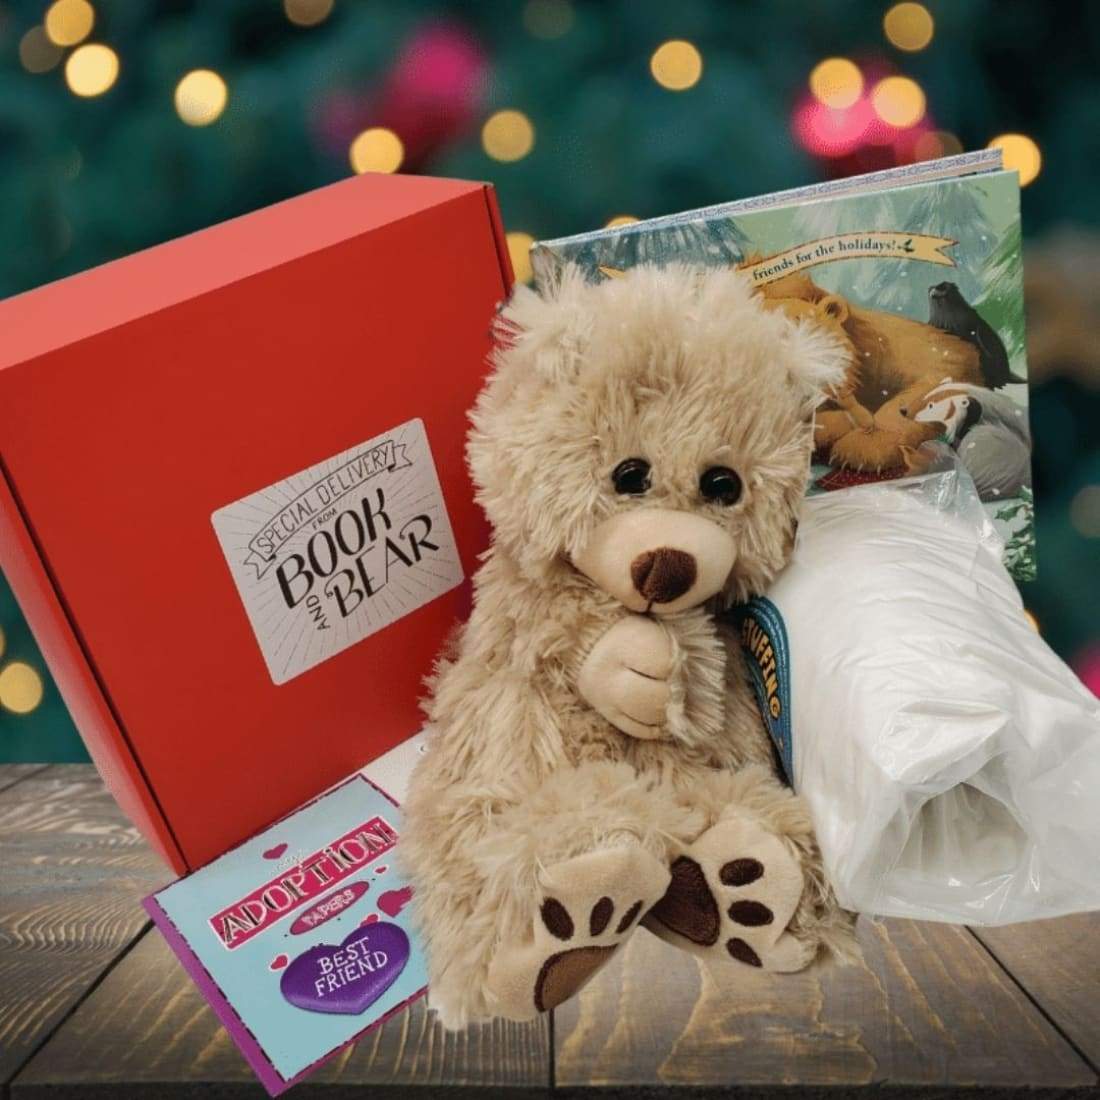 Christmas Teddy Bear Book and Bear Box with a Teddy Bear to easily build yourself, a picture book, and a Christmas gift surprise. Shown outside their box.